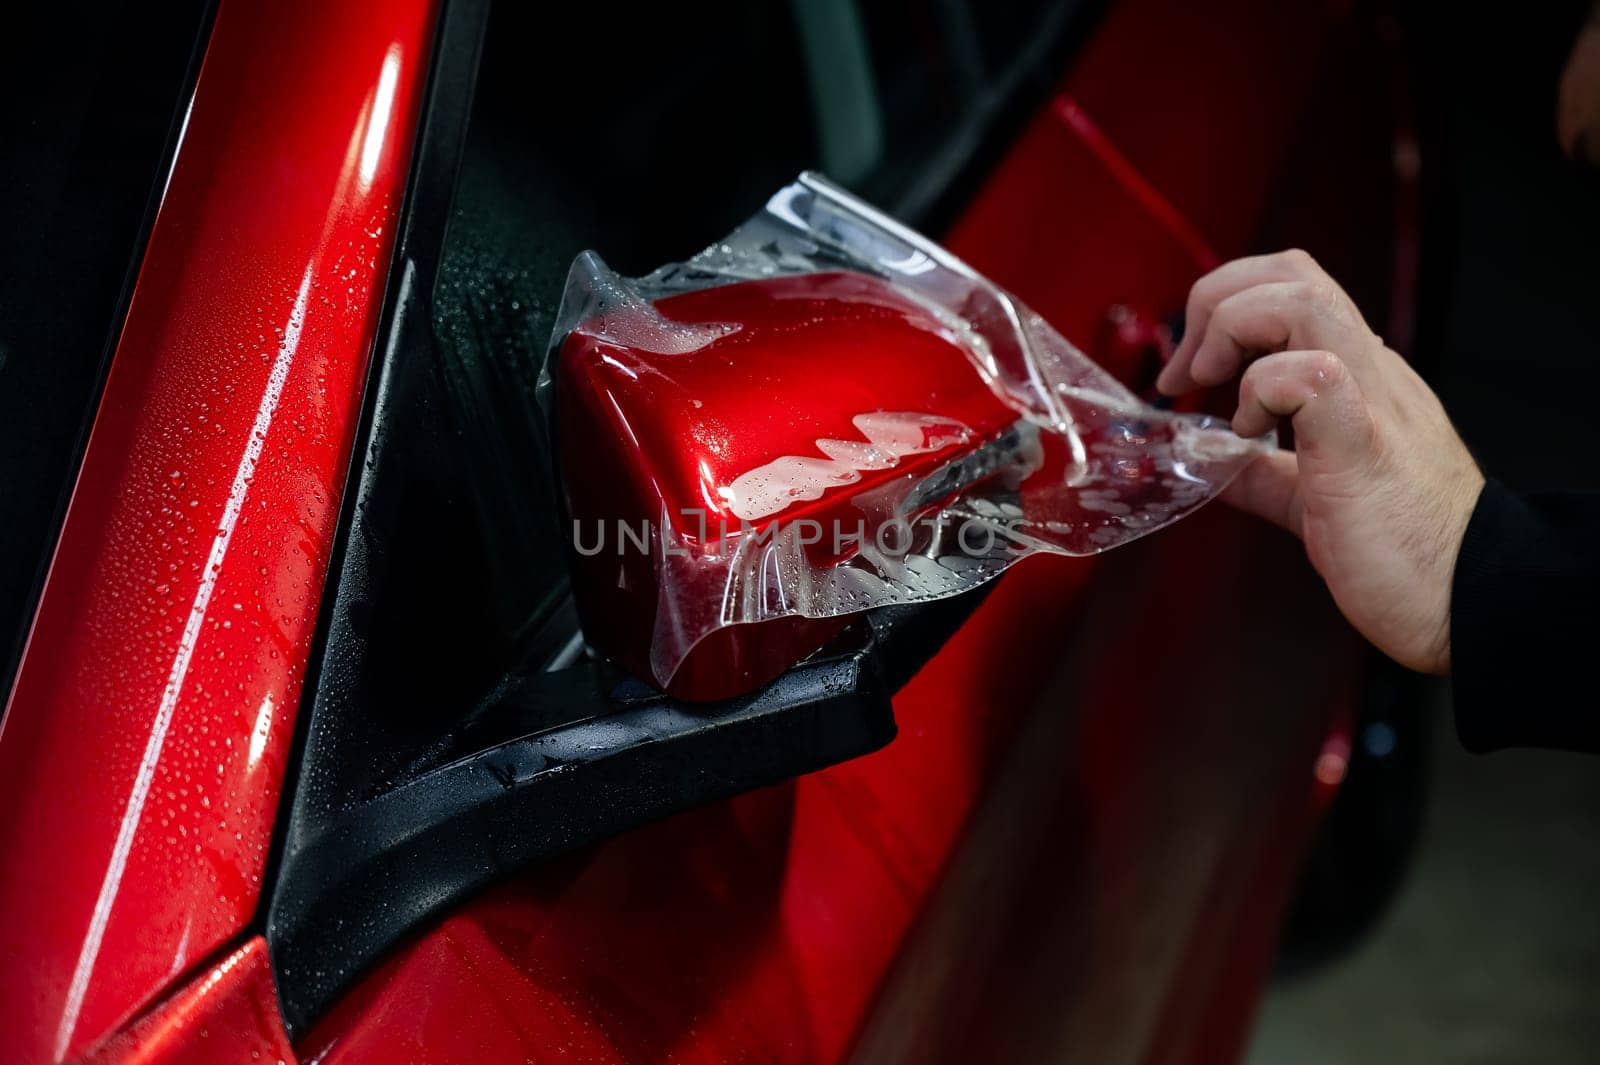 The master applies vinyl film to the side view mirror of a car